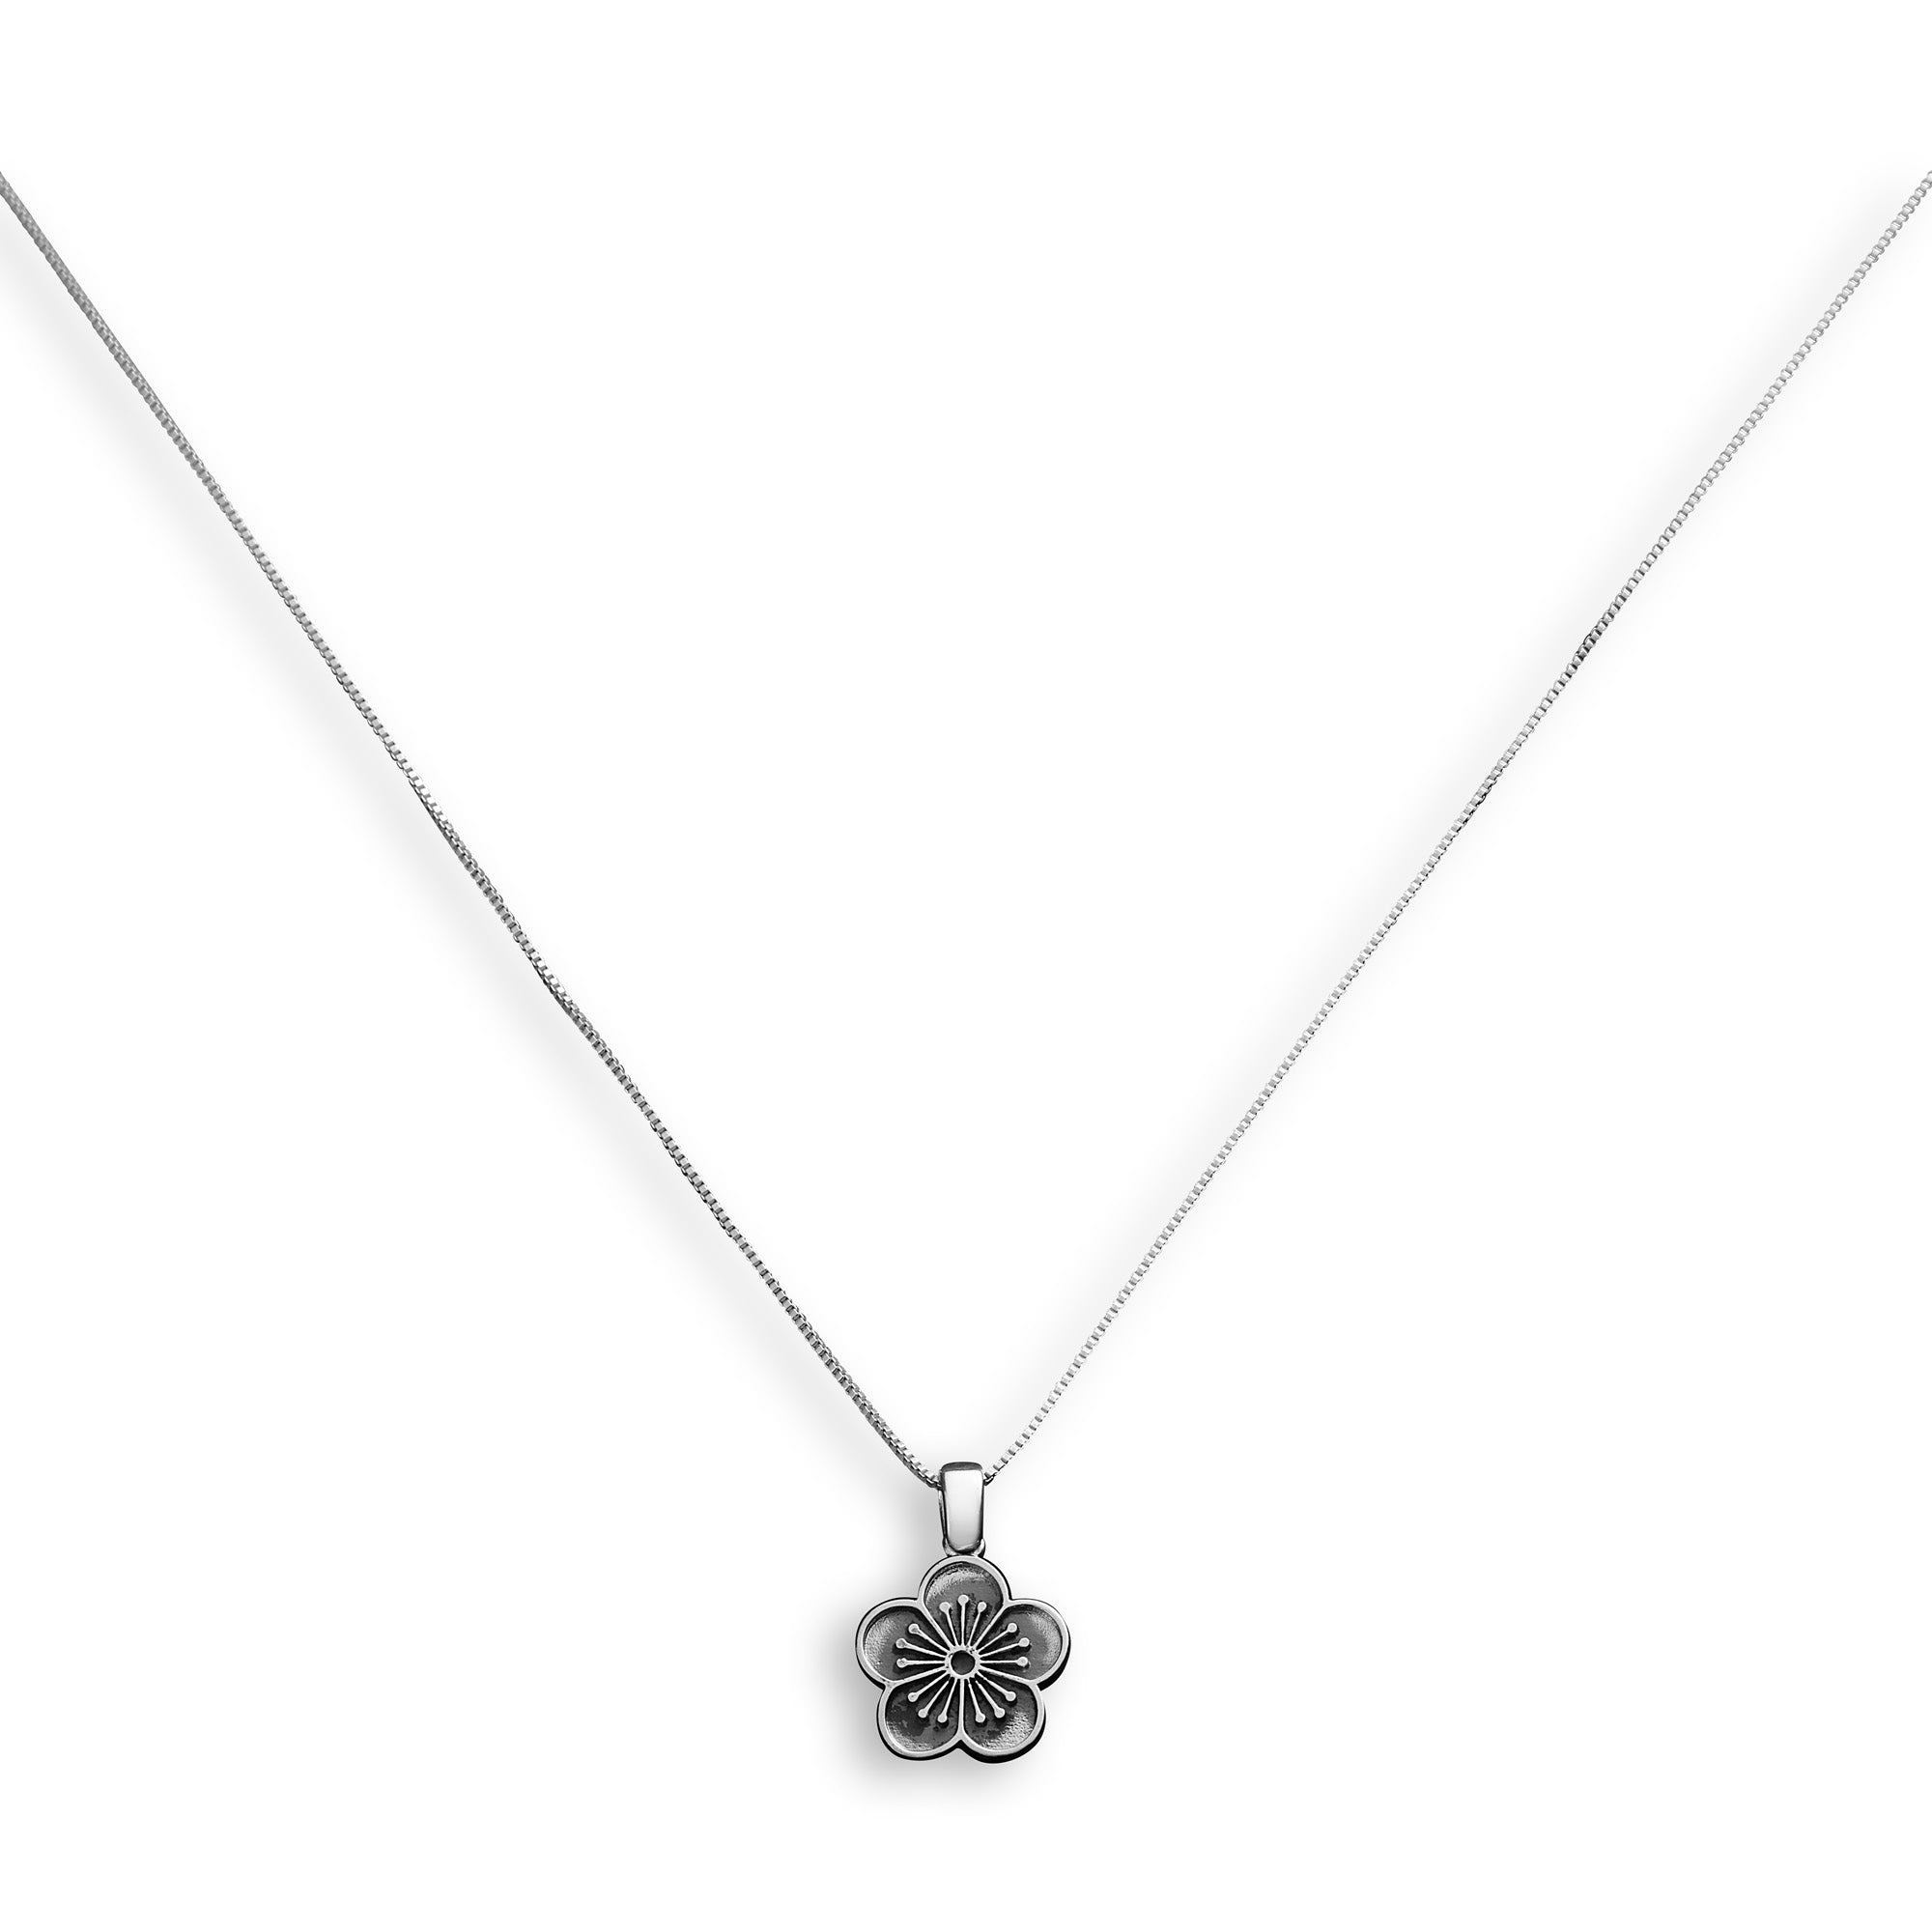 Pendant with small silver and gold leaf dome on silver chain